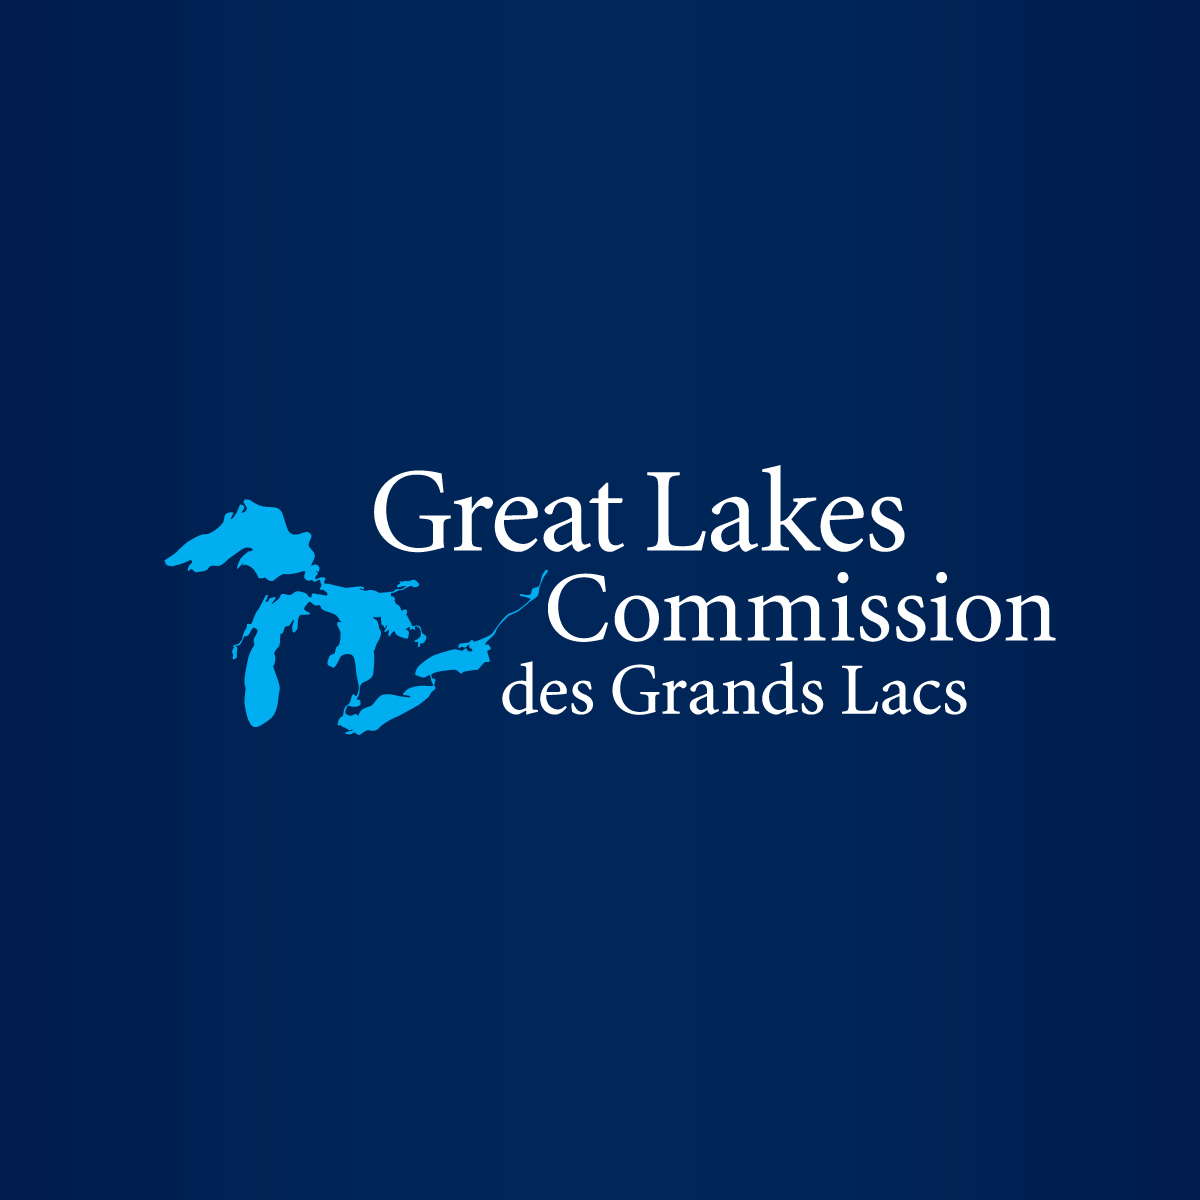 Great Lakes ice coverage is well below average; what are the impacts?